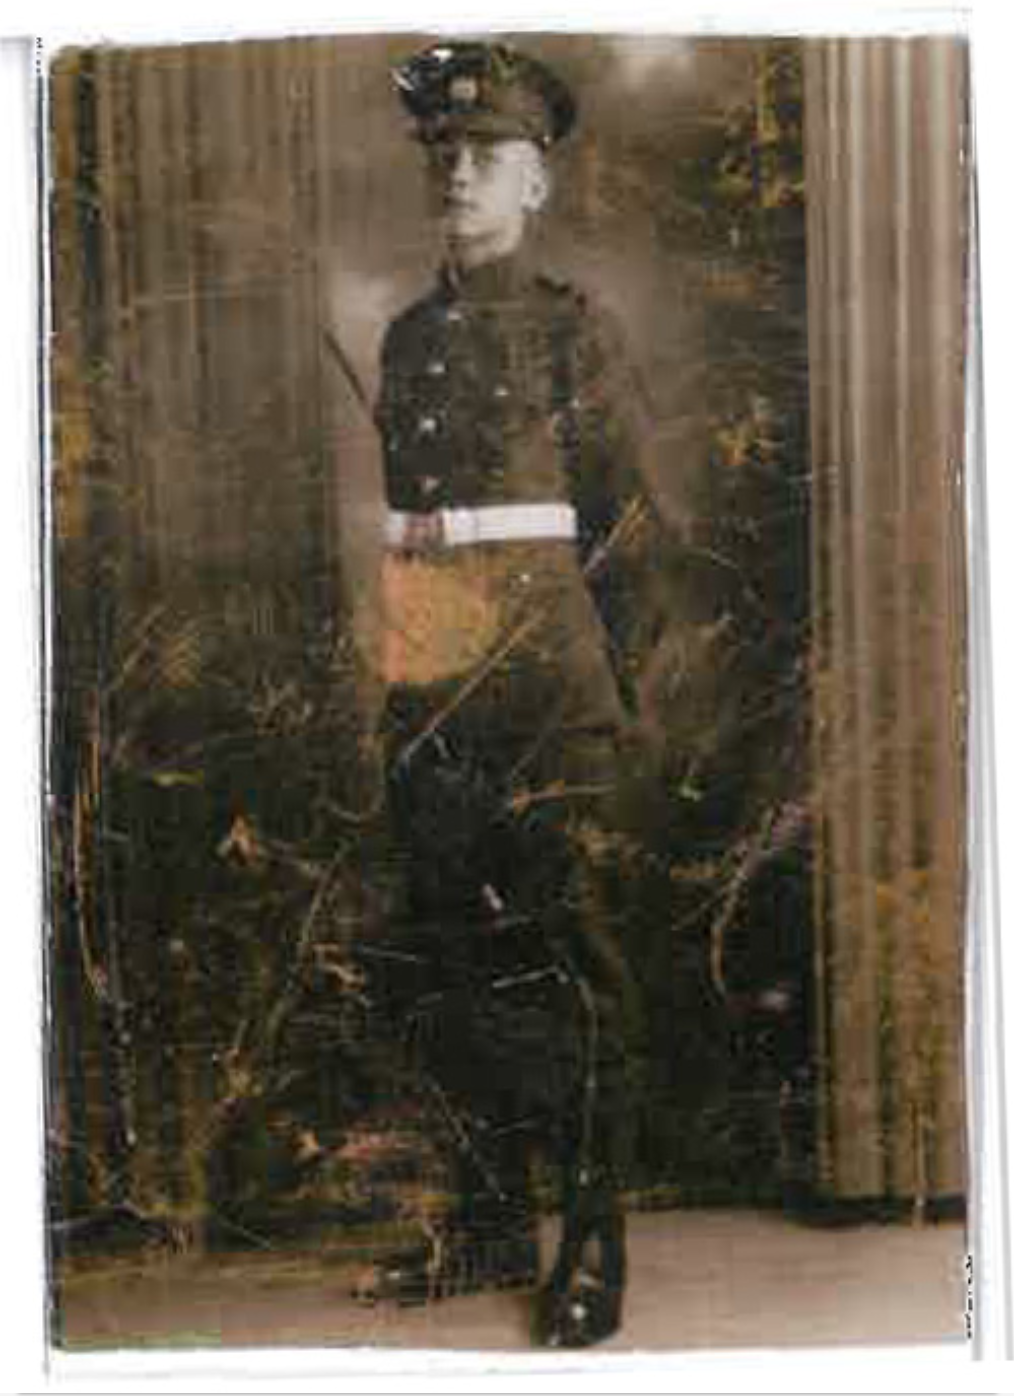 Old Photograph of John Humphrey's in his army uniform as a young soldier